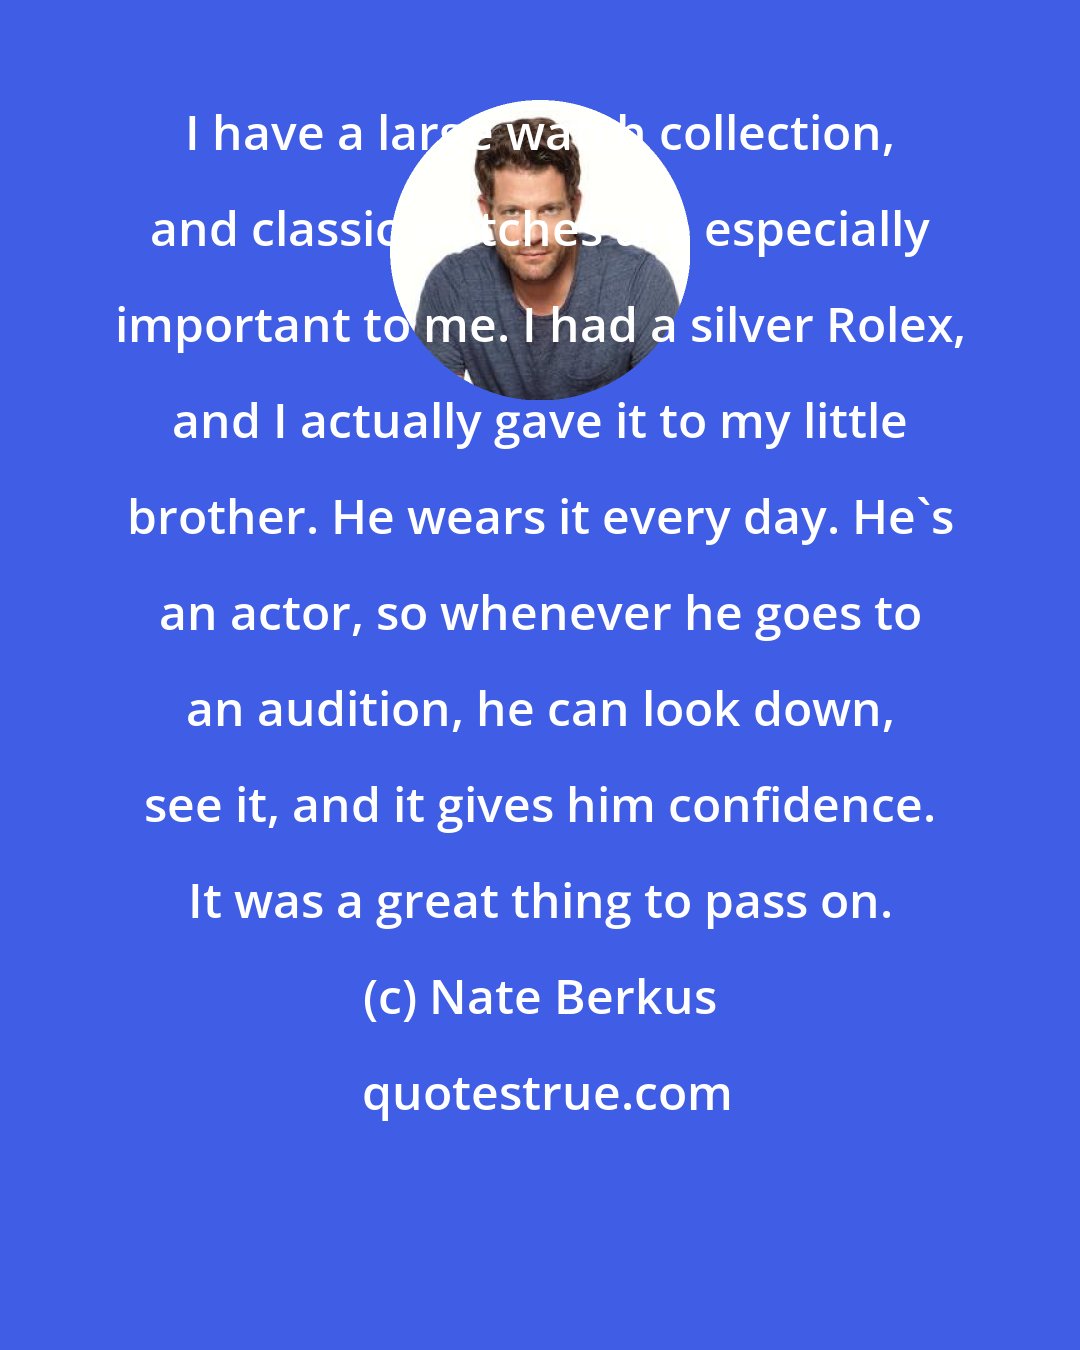 Nate Berkus: I have a large watch collection, and classic watches are especially important to me. I had a silver Rolex, and I actually gave it to my little brother. He wears it every day. He's an actor, so whenever he goes to an audition, he can look down, see it, and it gives him confidence. It was a great thing to pass on.